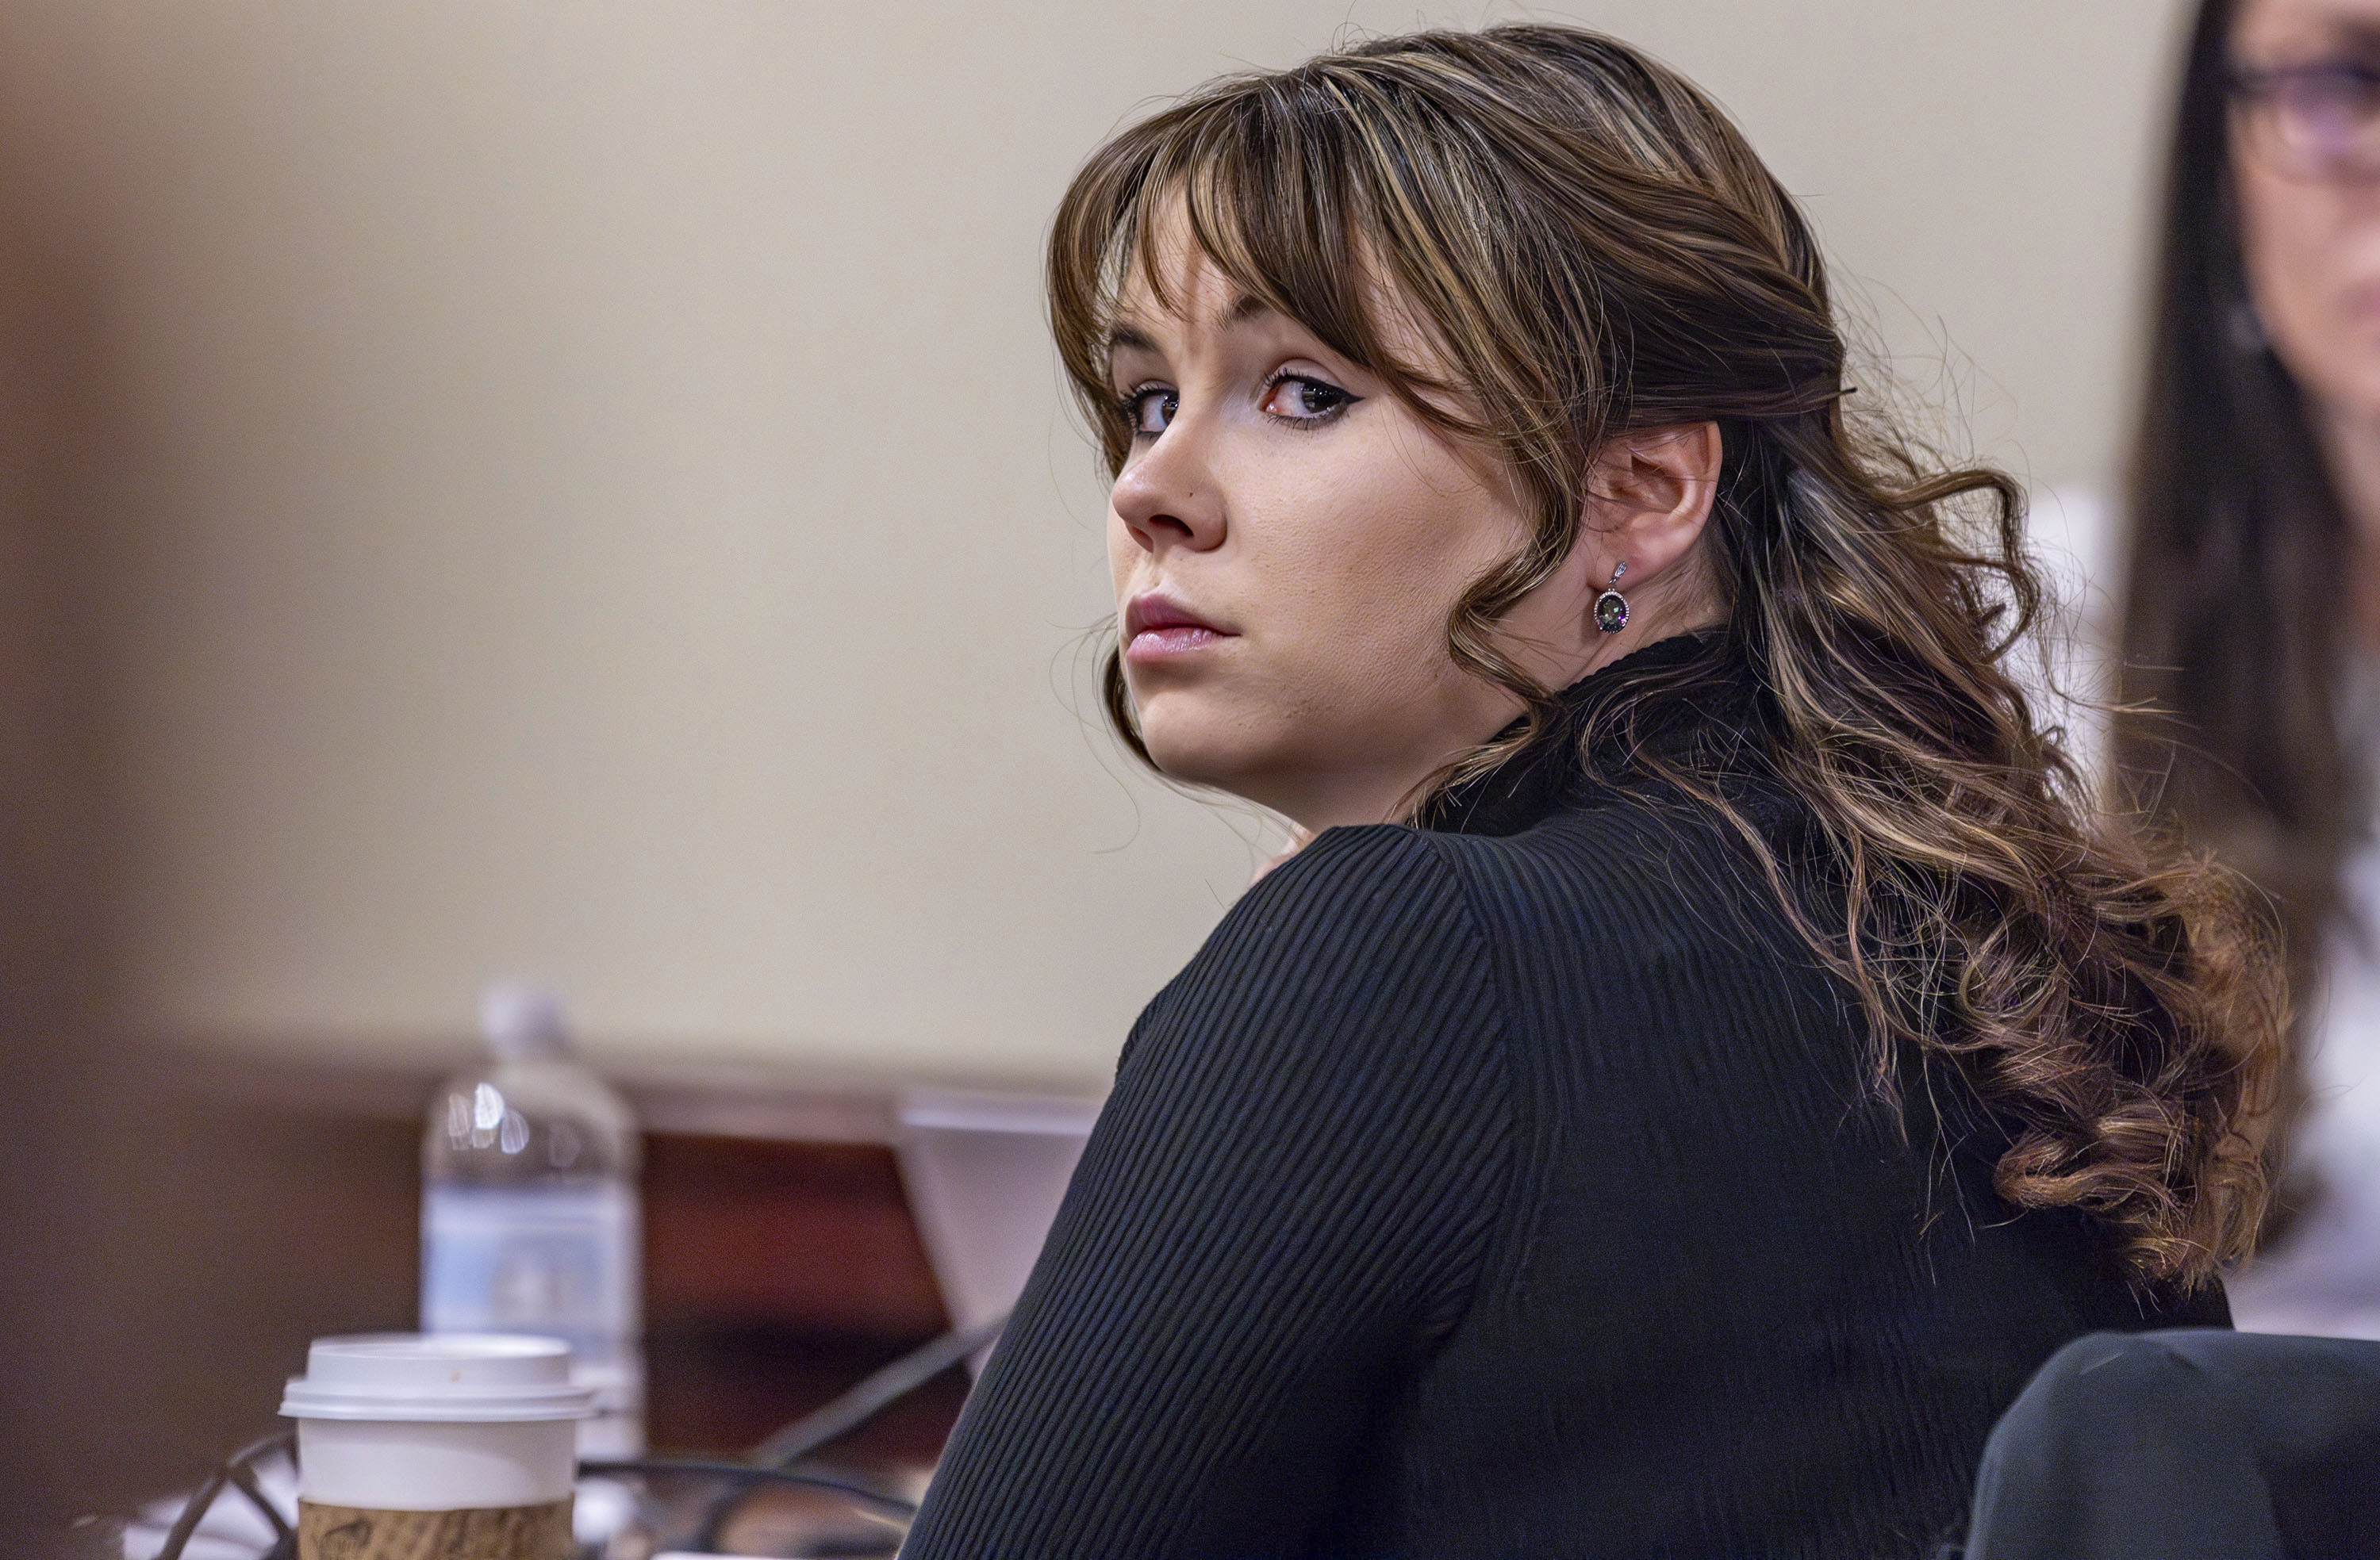 FILE - Hannah Gutierrez-Reed, the former armorer at the movie "Rust," listens to closing arguments in her trial at district court, Wednesday, March 6, 2024, in Santa Fe, N.M. The movie weapons armorer is appealing her conviction for involuntary manslaughter in the fatal shooting of a cinematographer by Alec Baldwin on the set of the Western film “Rust.” In court documents released Tuesday, May 14, 2024 a defense attorney for Gutierrez-Reed filed a notice of appeal of the March conviction by a jury. (Luis Sánchez Saturno/Santa Fe New Mexican via AP, Pool, File)